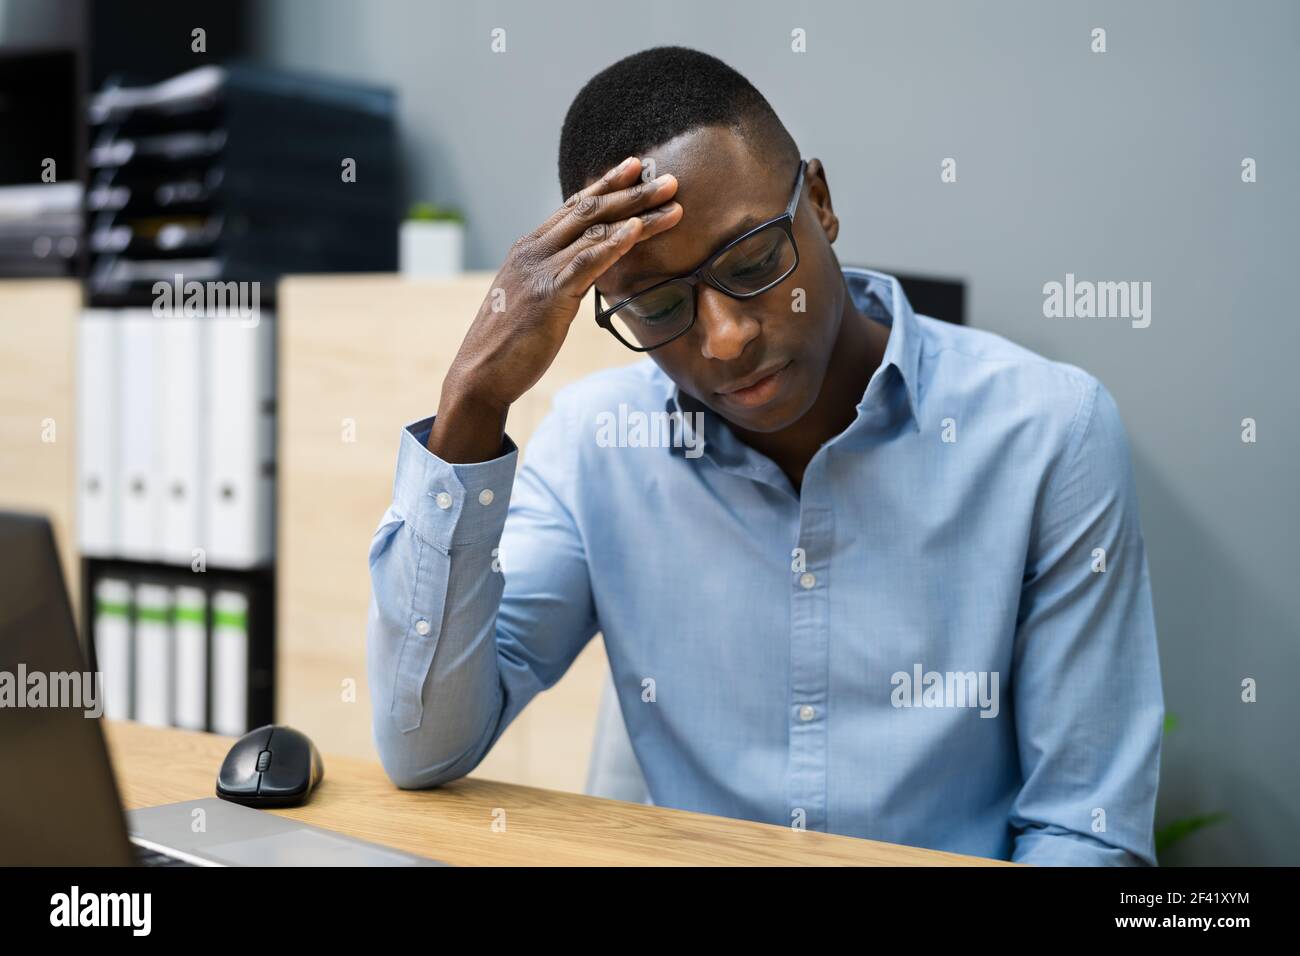 Bad Posture Distress And Fatigue After Drink And Hangover Stock Photo